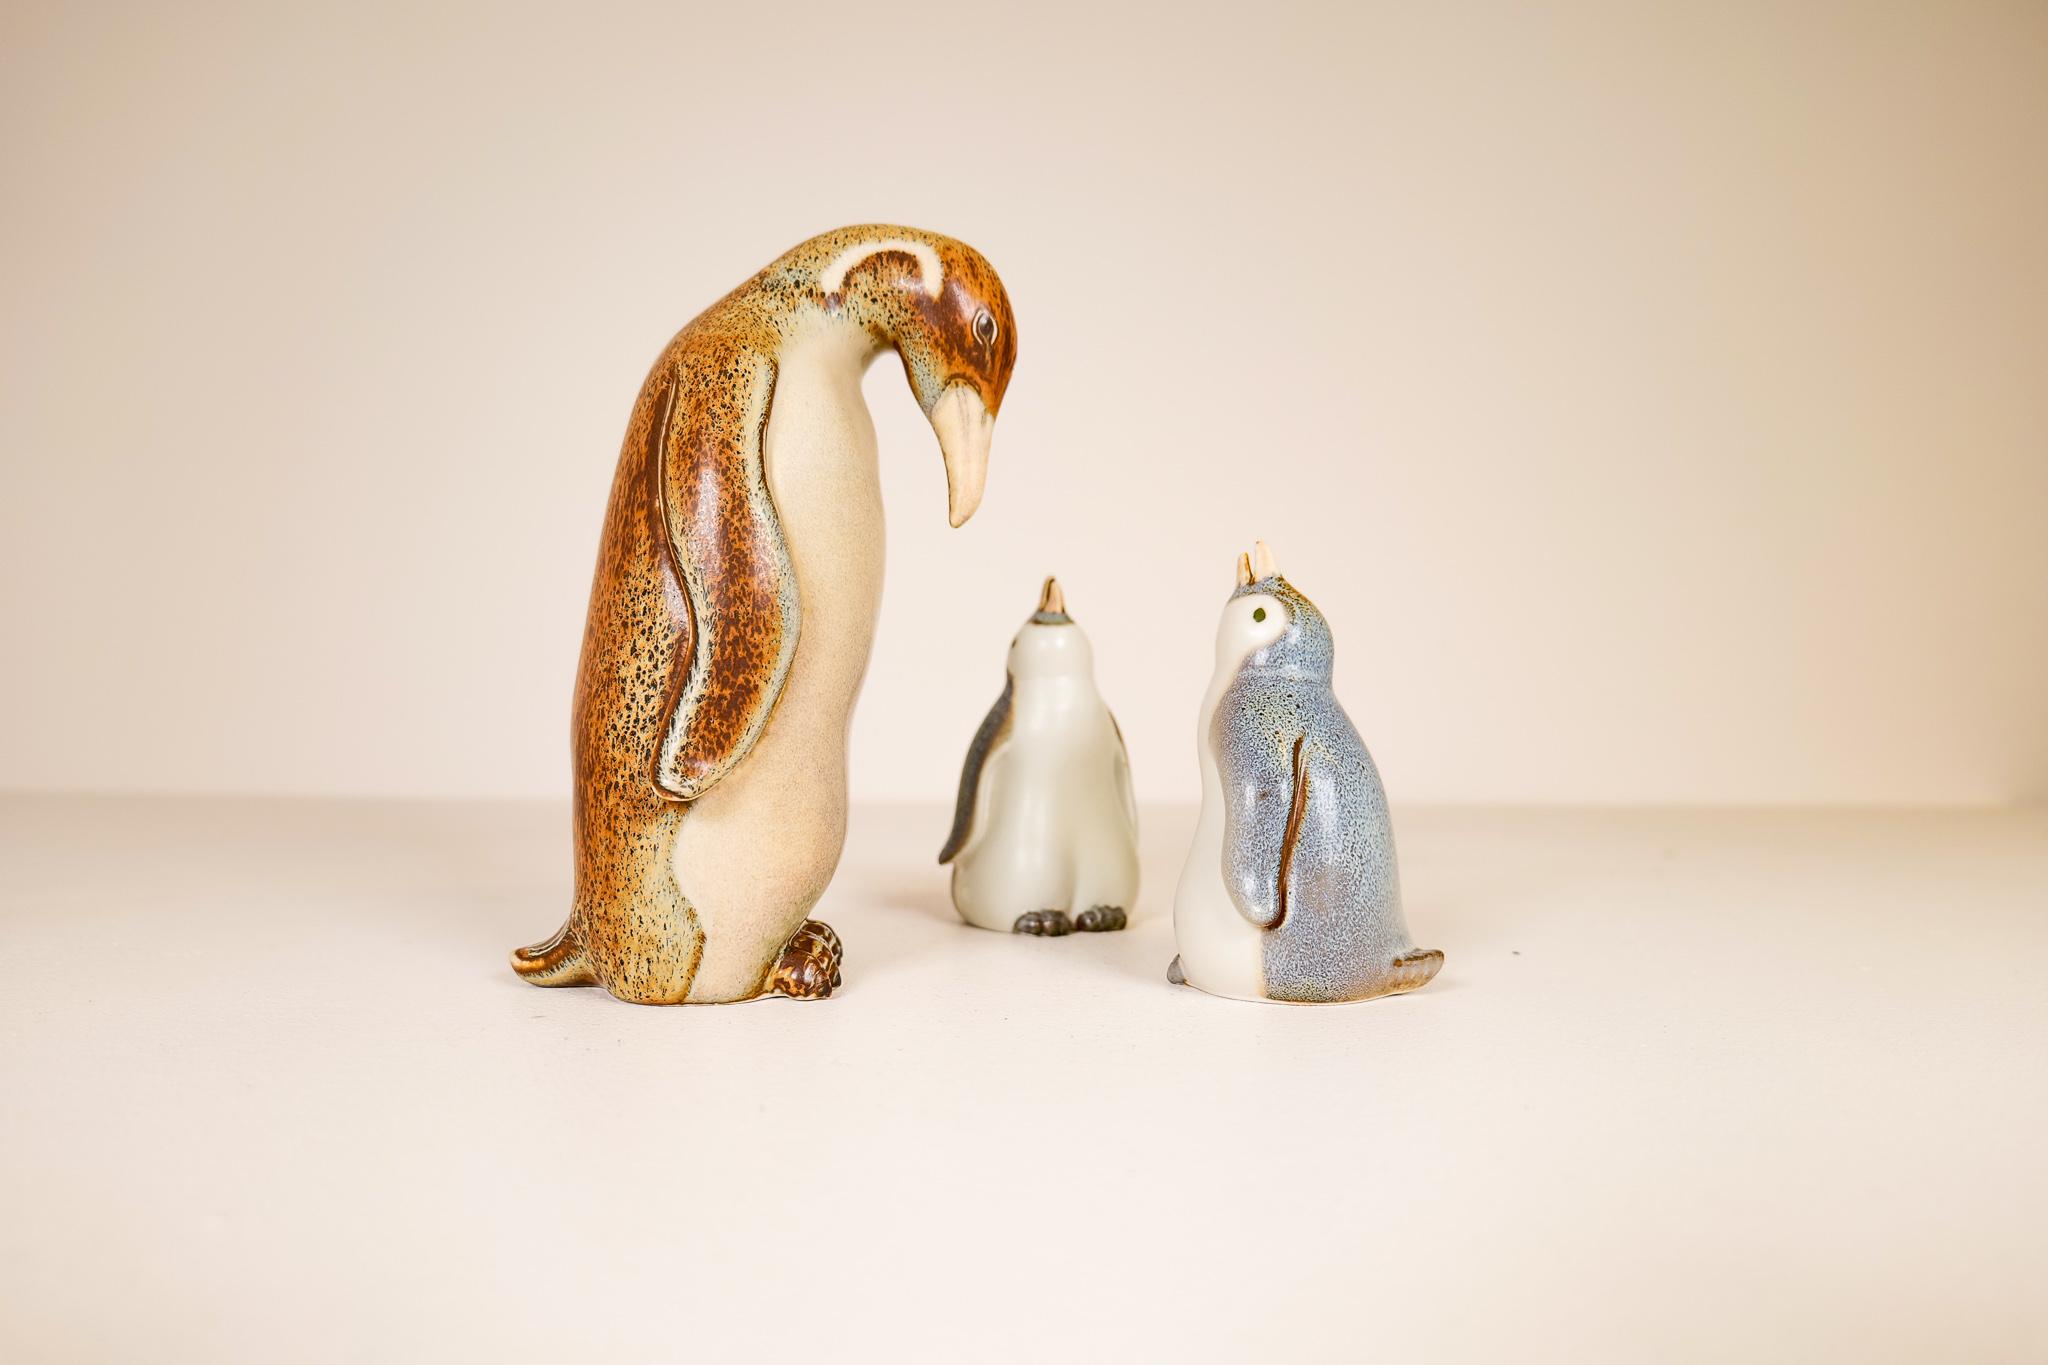 This set is 3 pieces of ceramic penguins from Rörstrand and maker / Designer Gunnar Nylund. Made in Sweden in the mid-century. Beautiful glazed and in good condition. One large and two baby penguins. 

The large one with glaze missing on the top